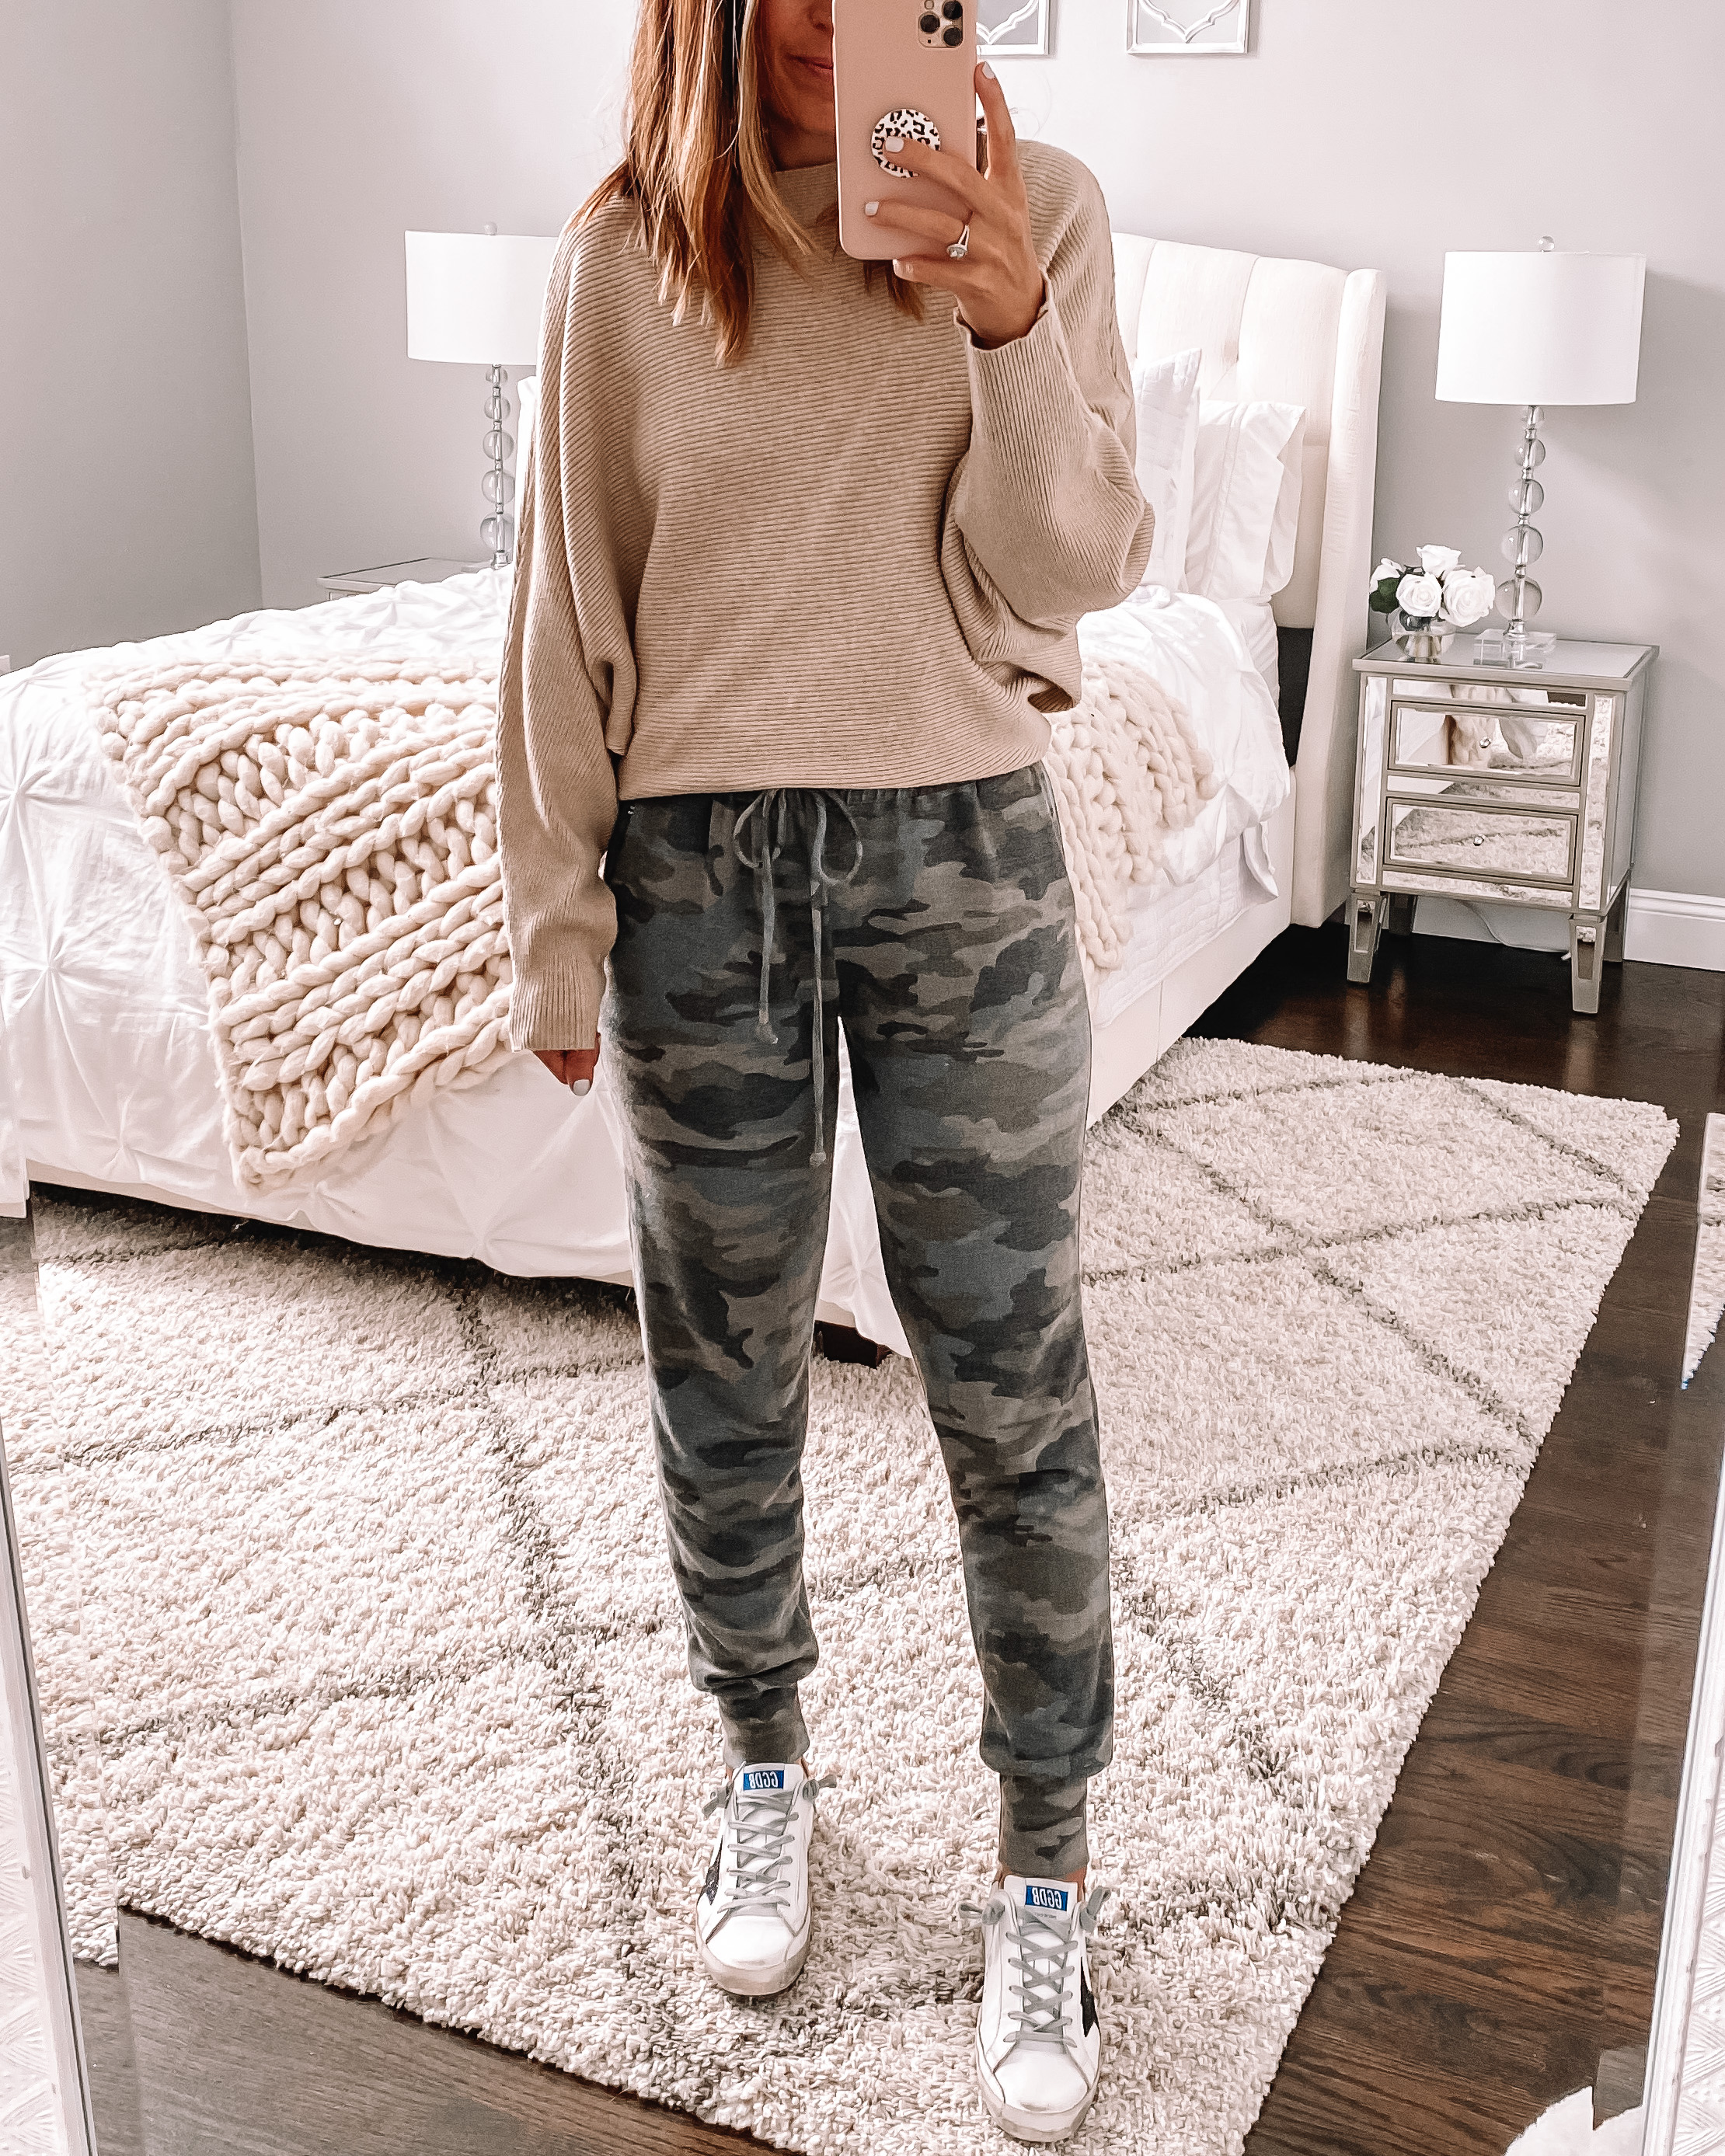 joggers and sneakers outfit